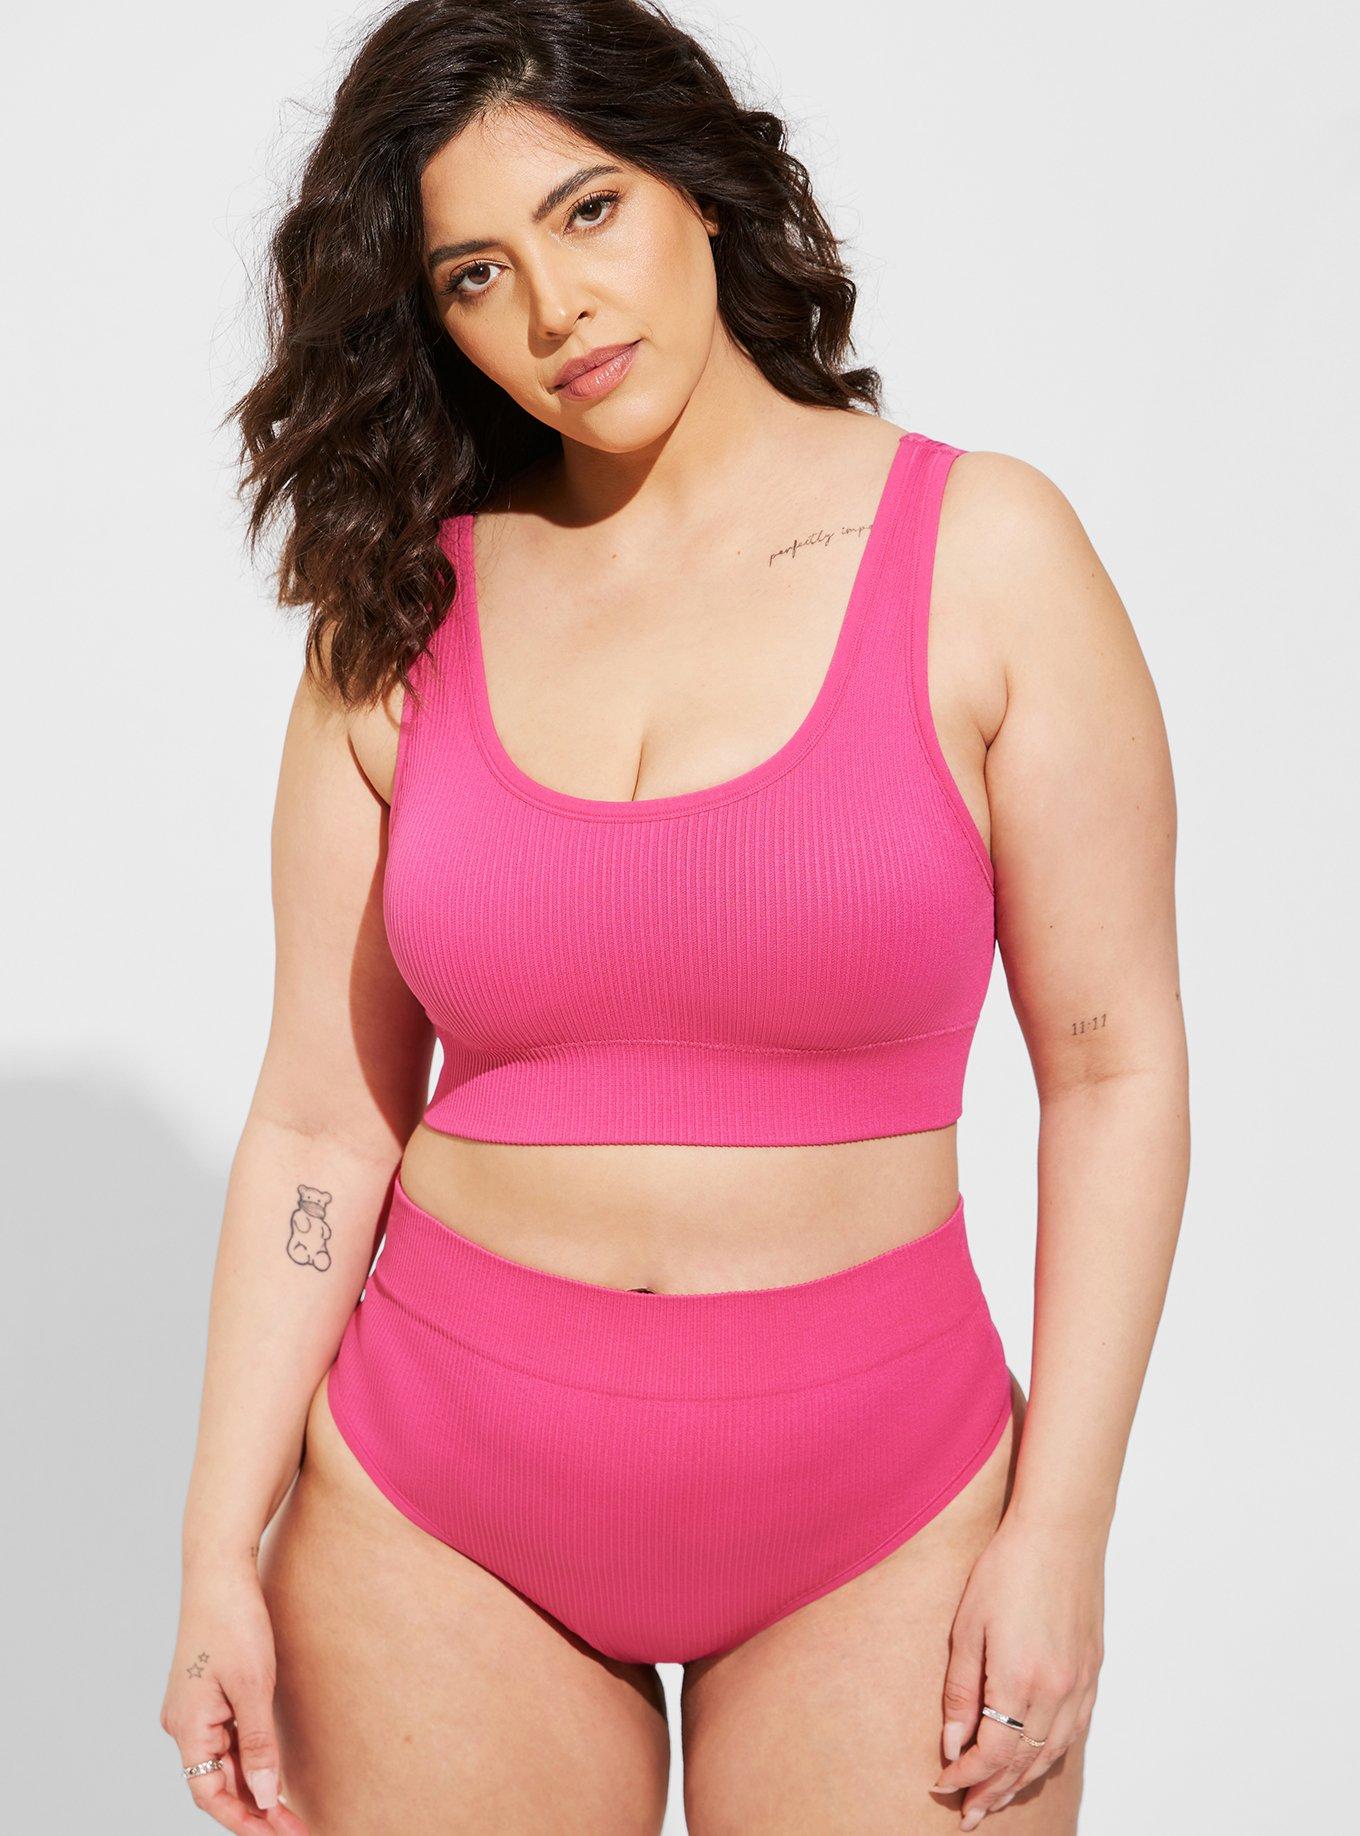 Torrid - We've got you covered, LITERALLY! Our new sexy